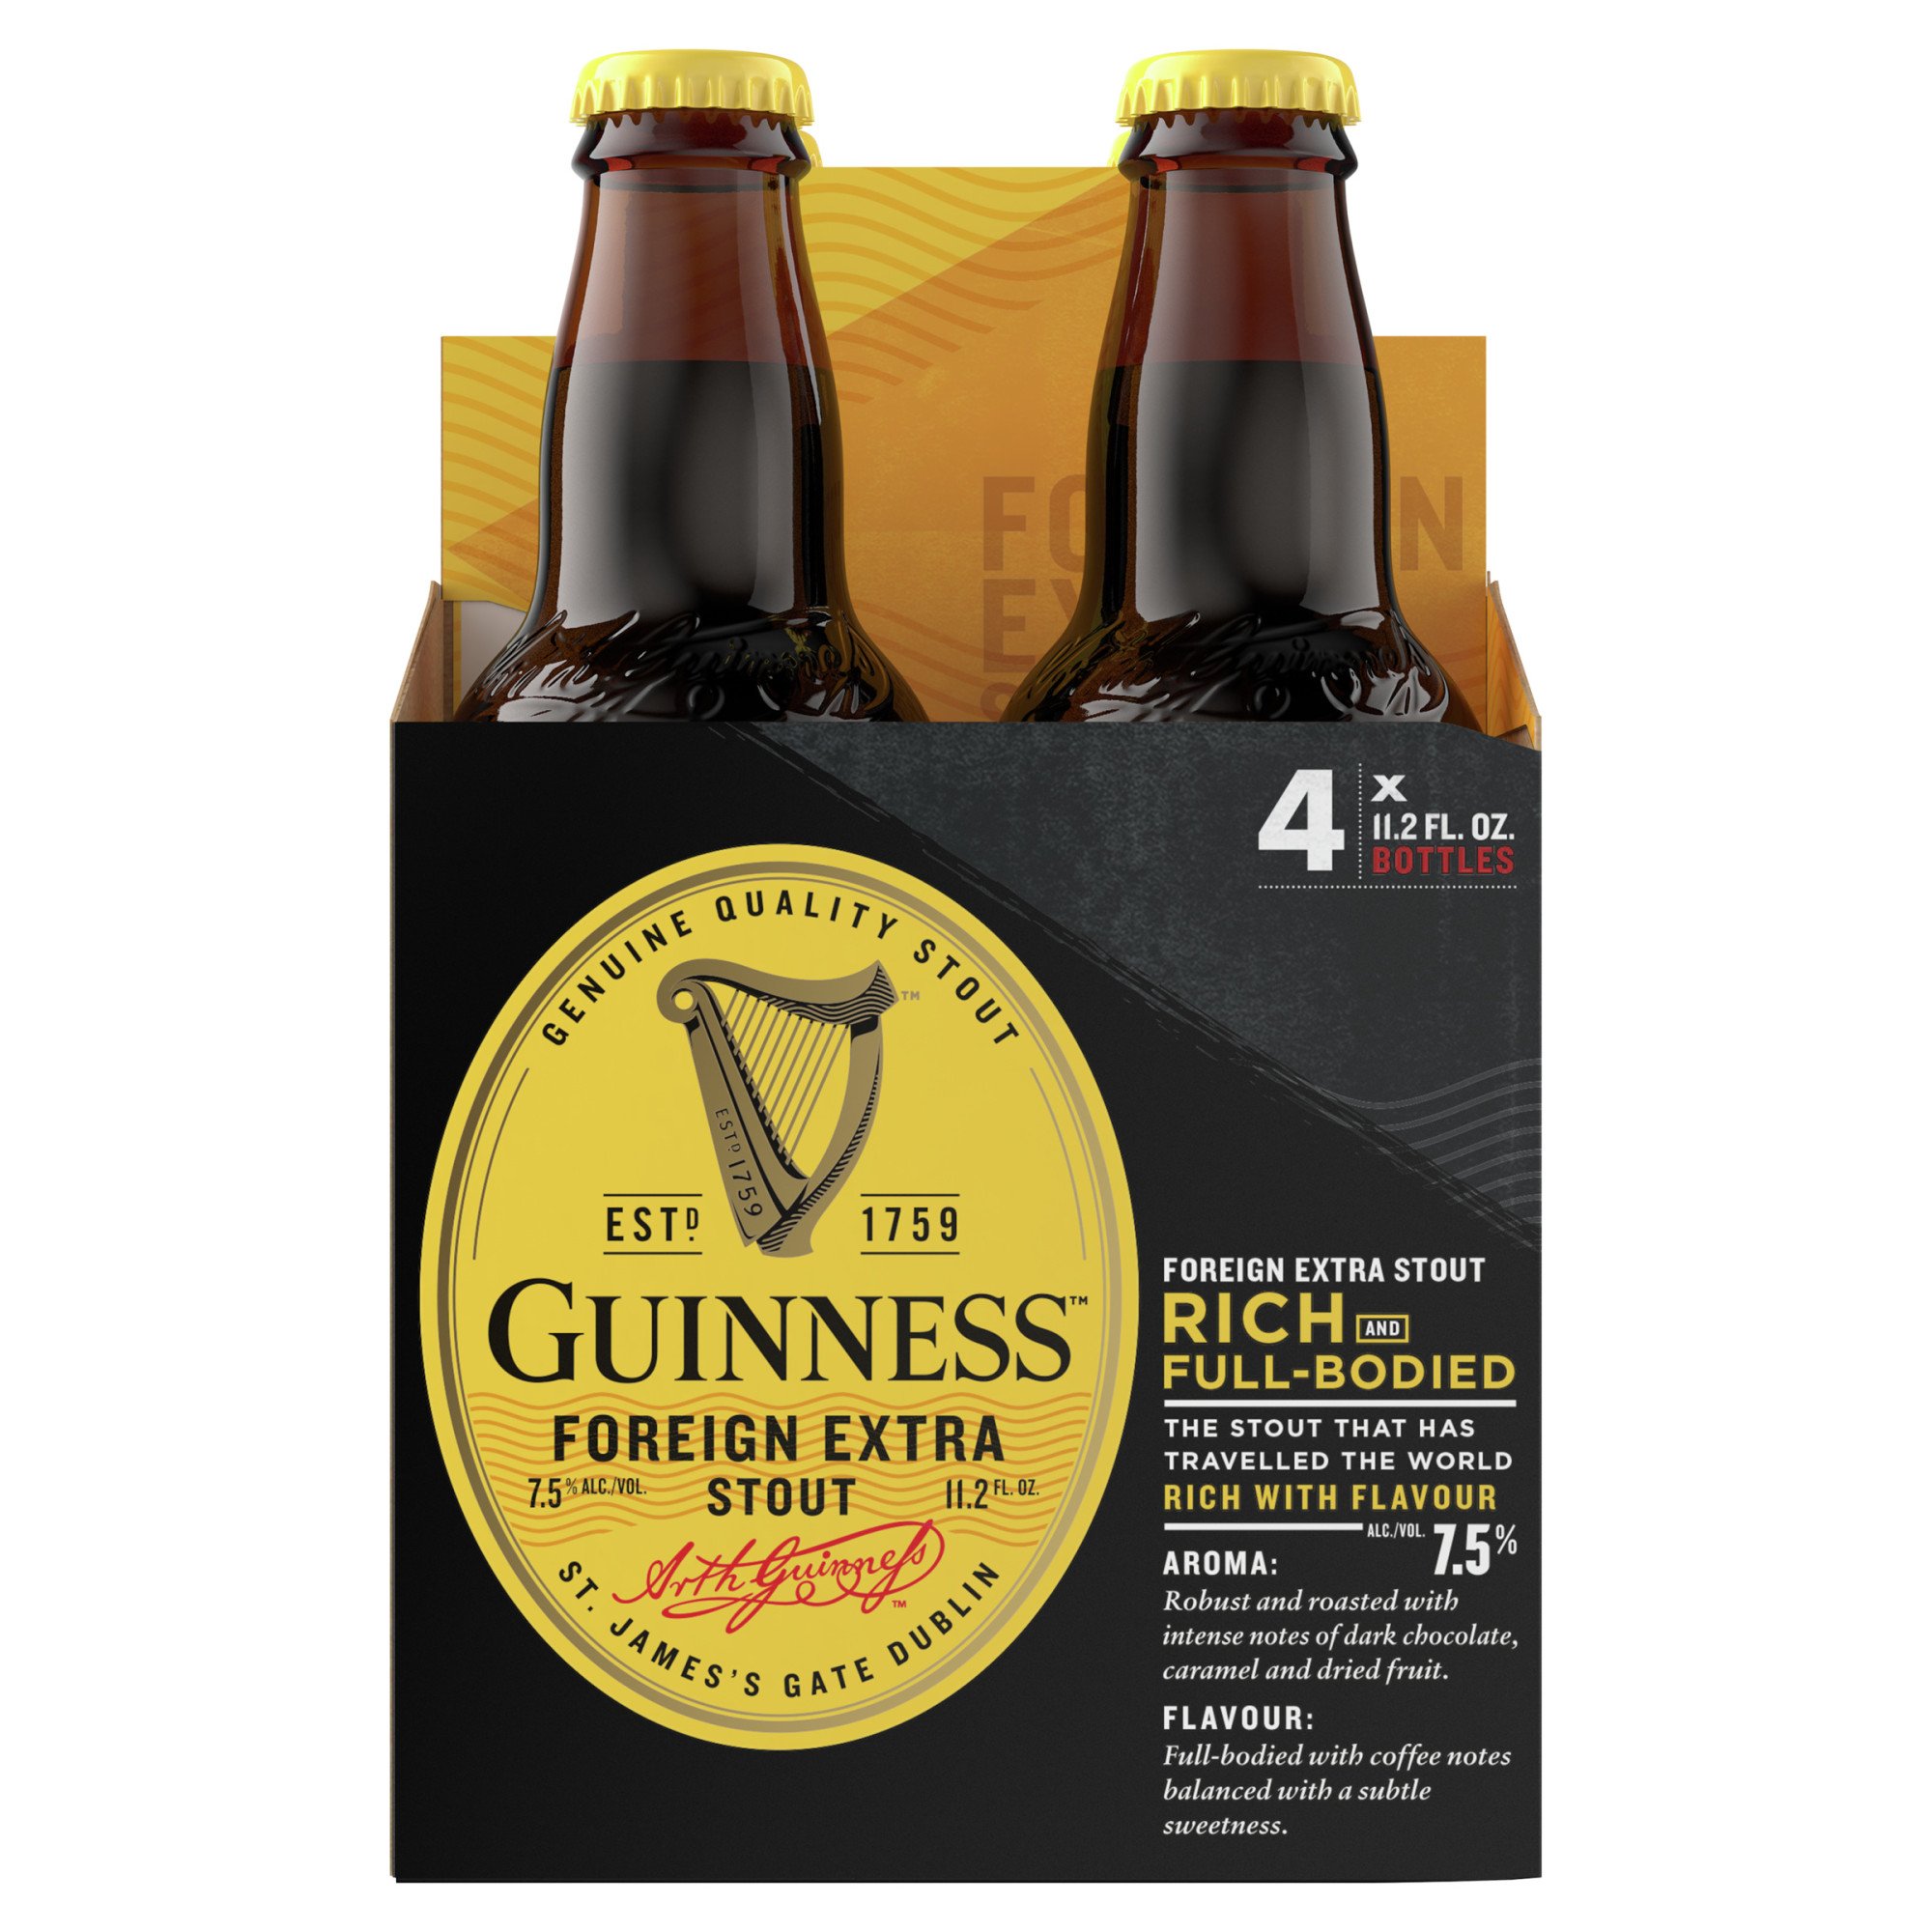 Guinness Draught Stout Beer - Shop Beer at H-E-B